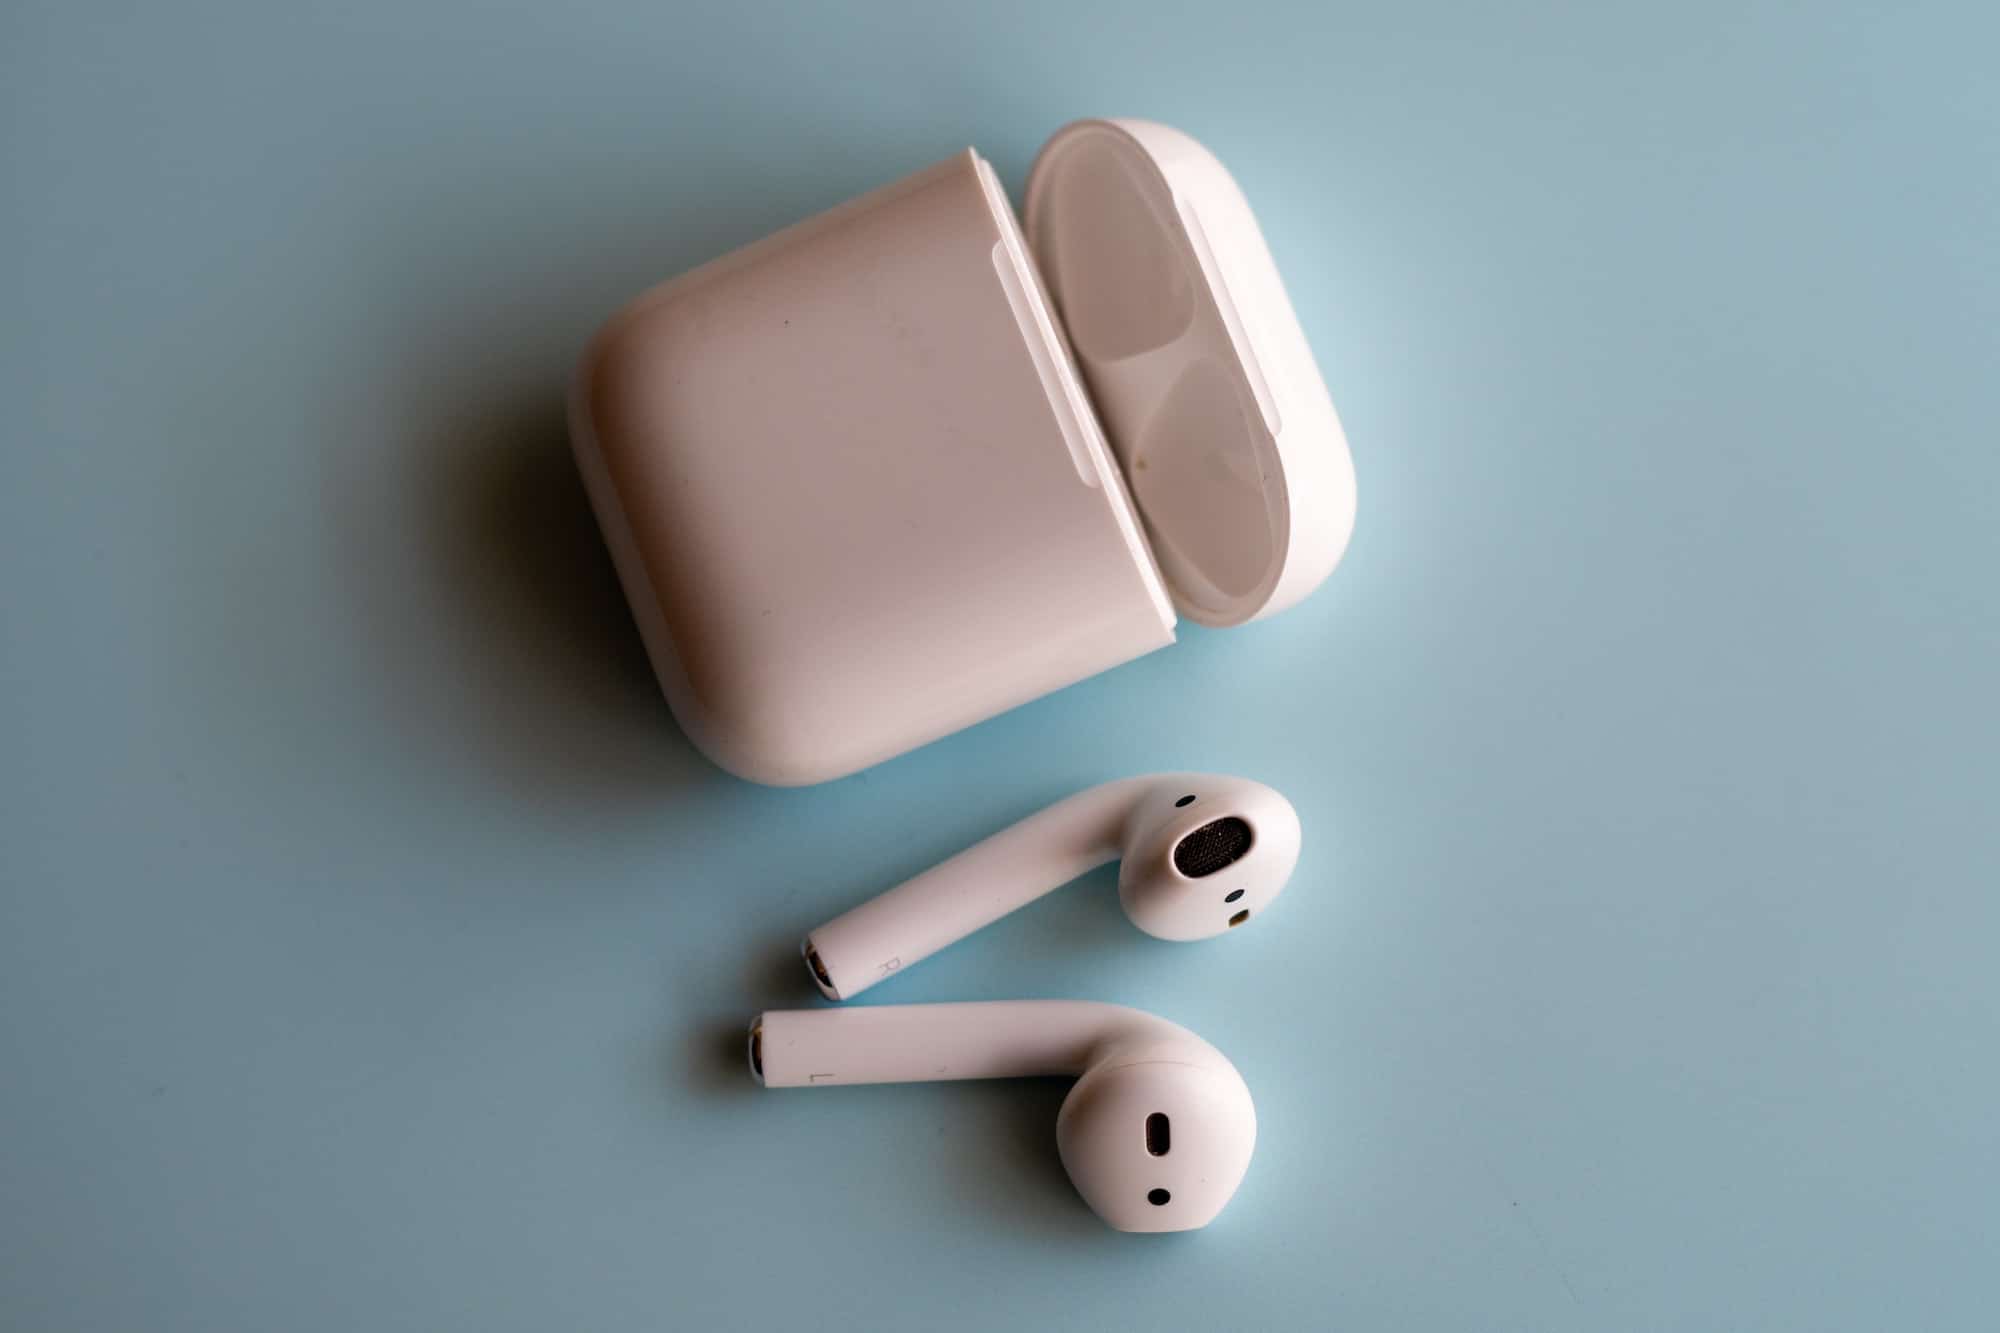 New AirPods Features in iOS 15